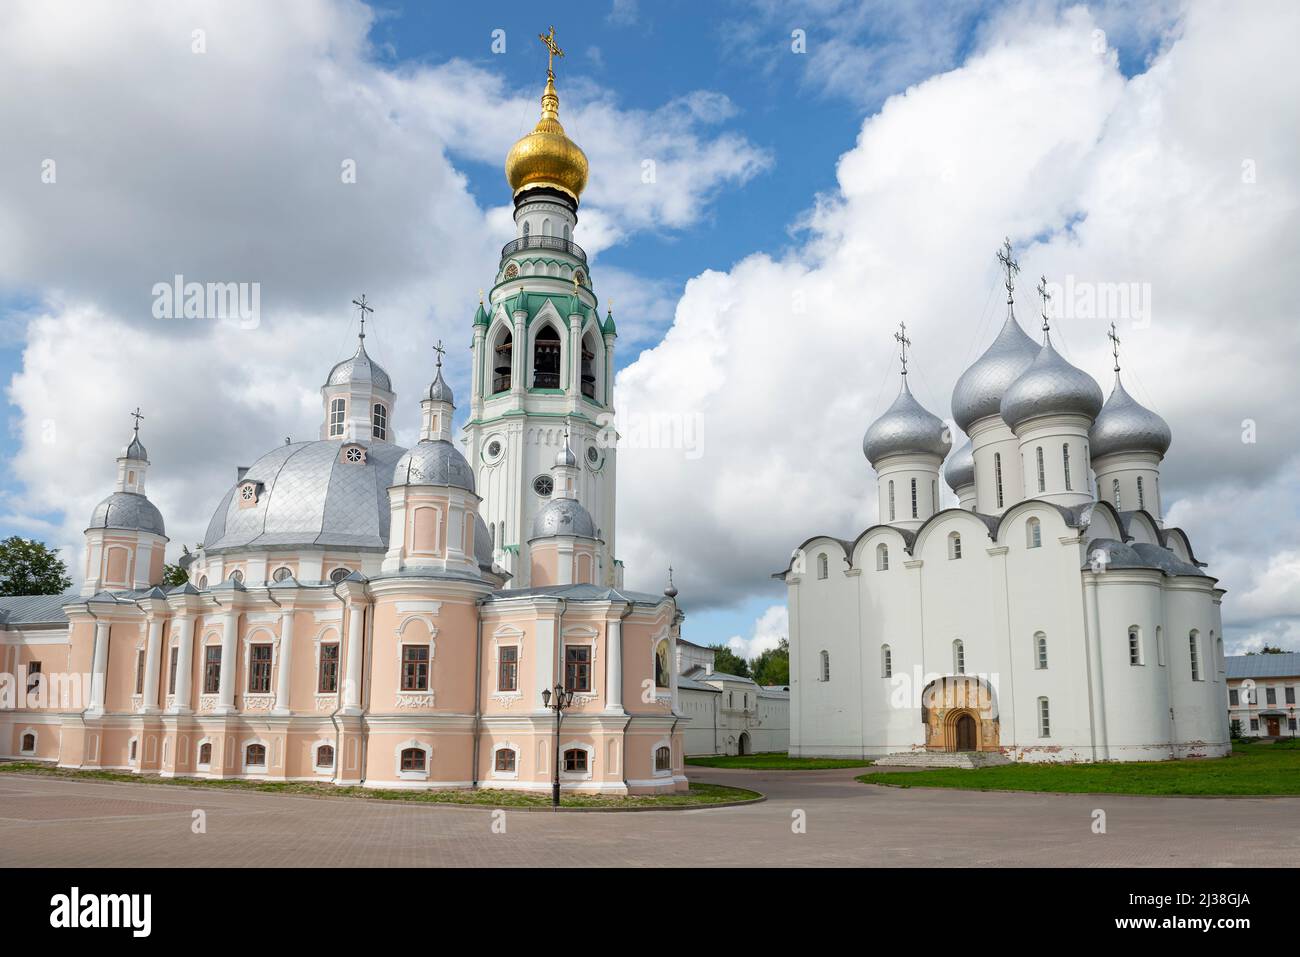 The ancient Cathedrals of the Resurrection of Christ and St. Sophia on Kremlin Square. Vologda, Russia Stock Photo